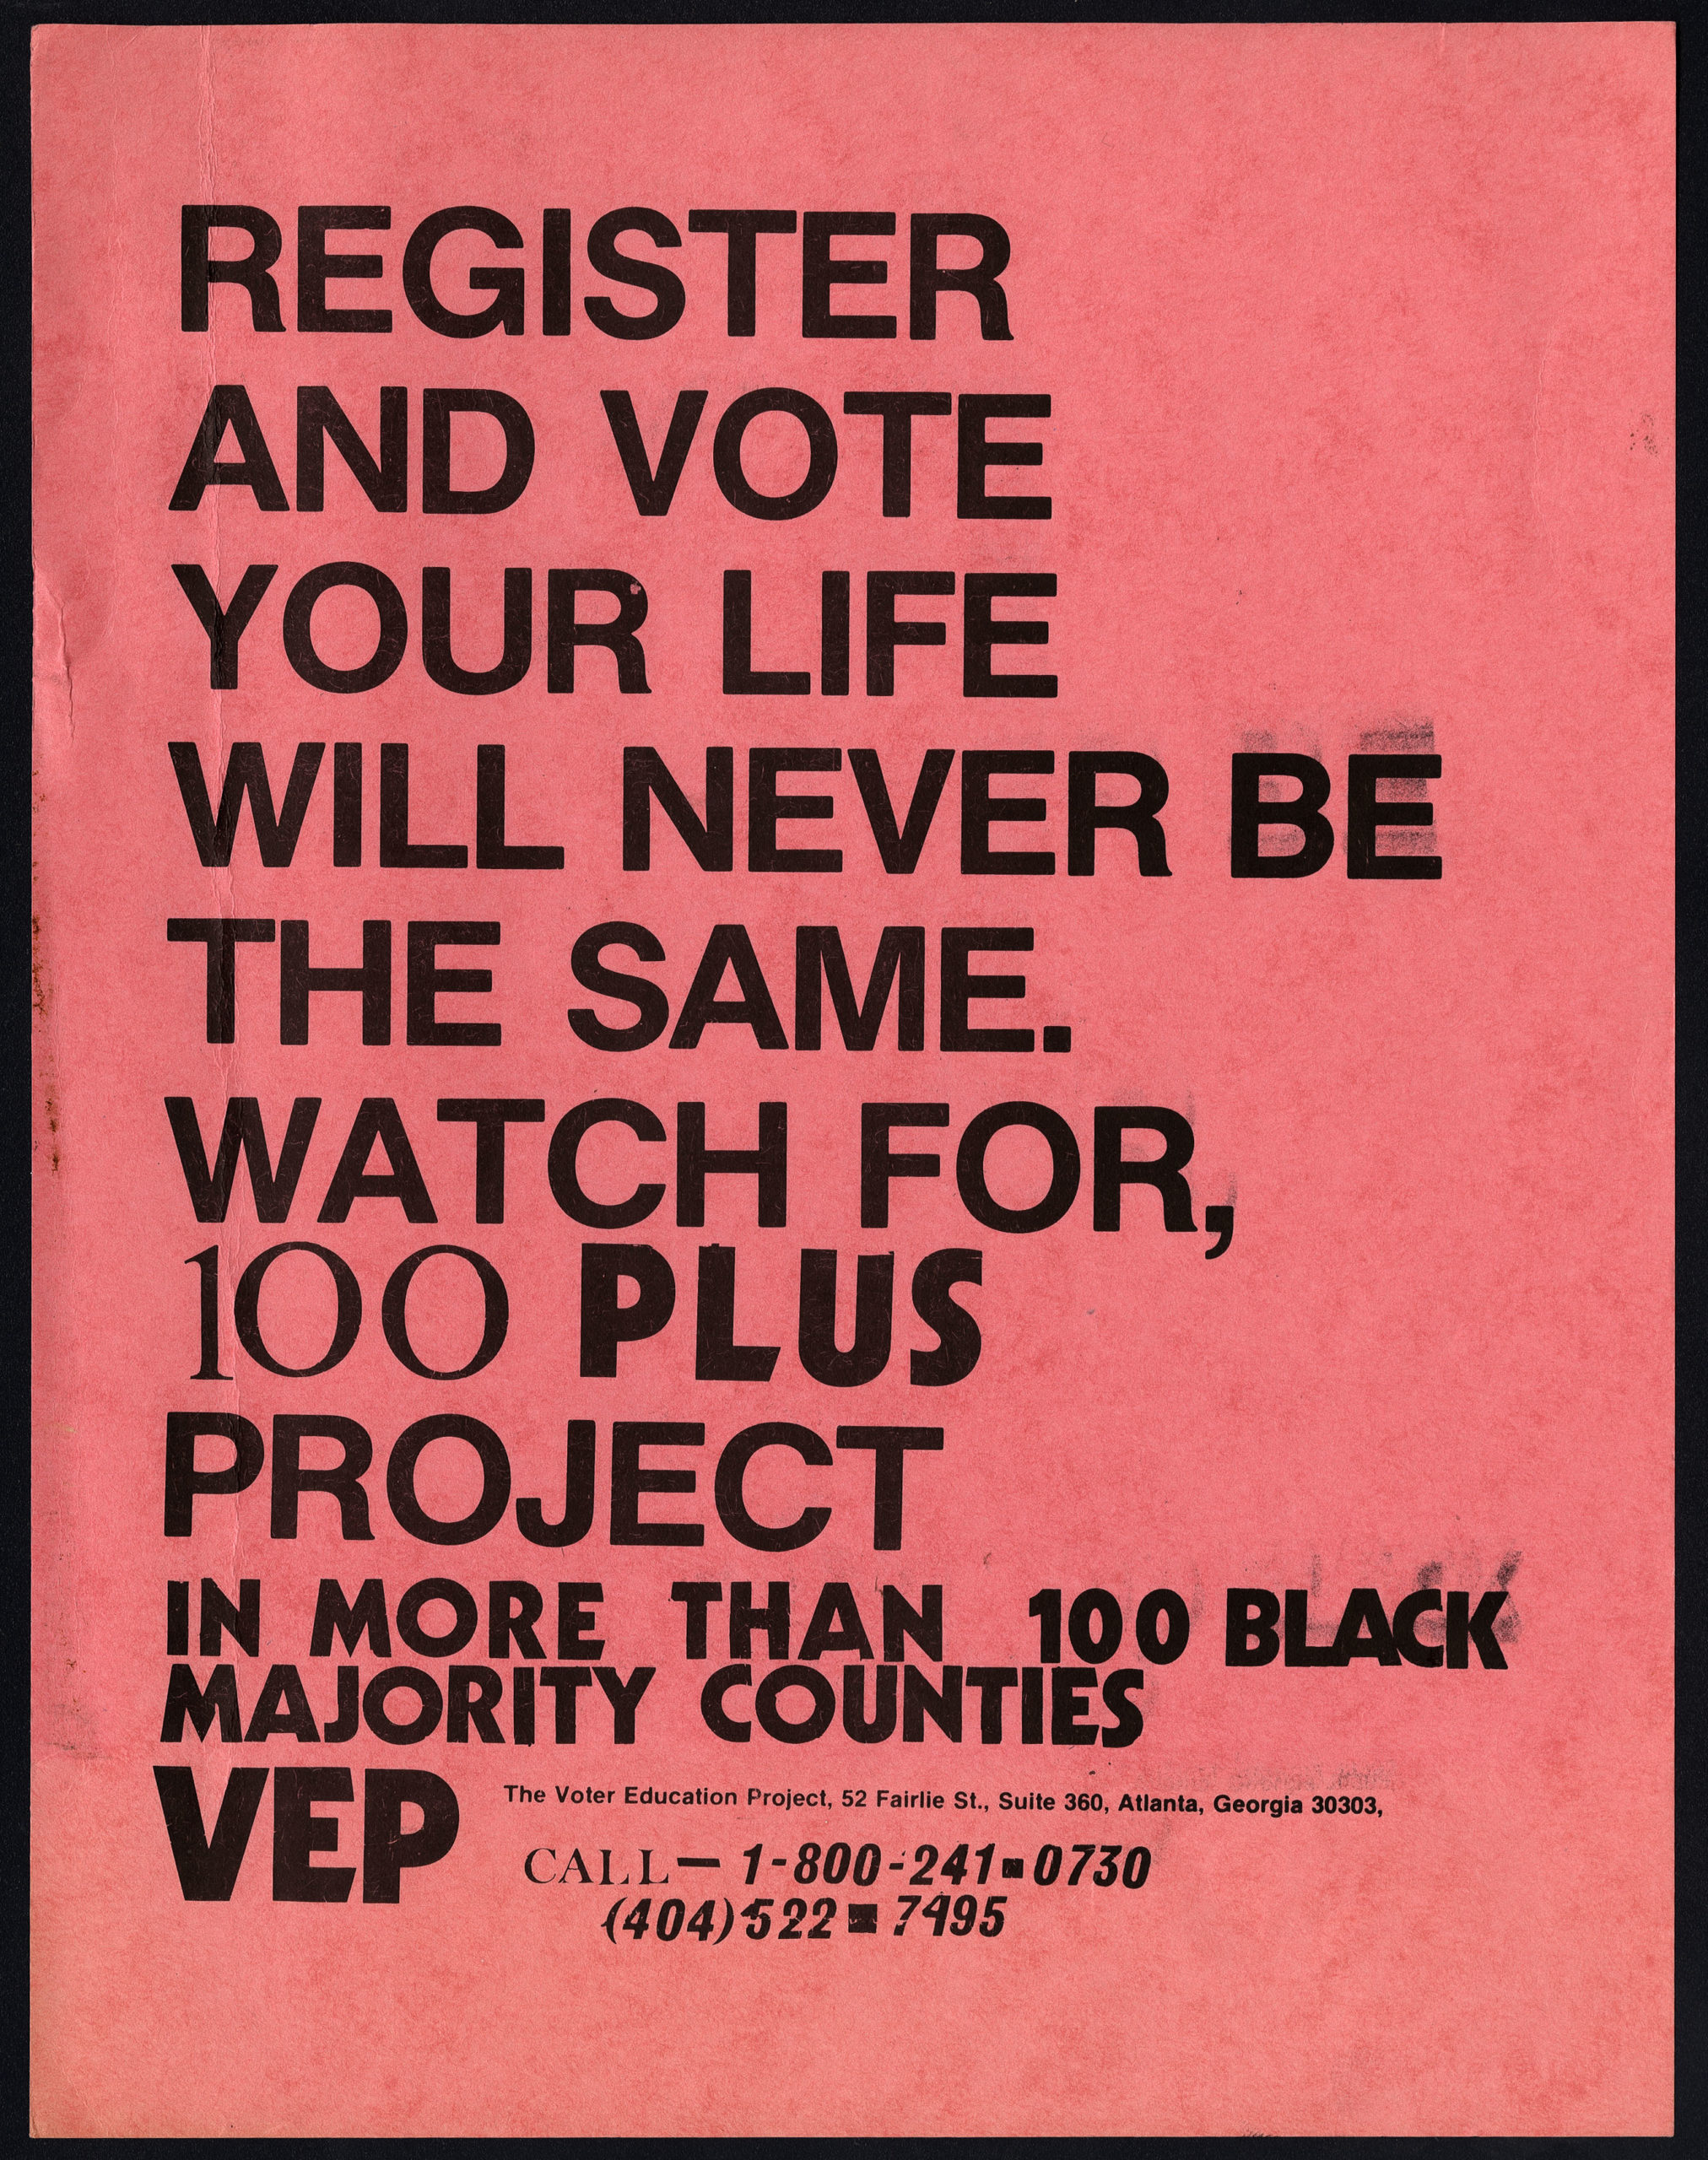 100 Plus Project flyer,Voter Education Project (Southern Regional Council),circa 1980,Voter Education Project organizational records